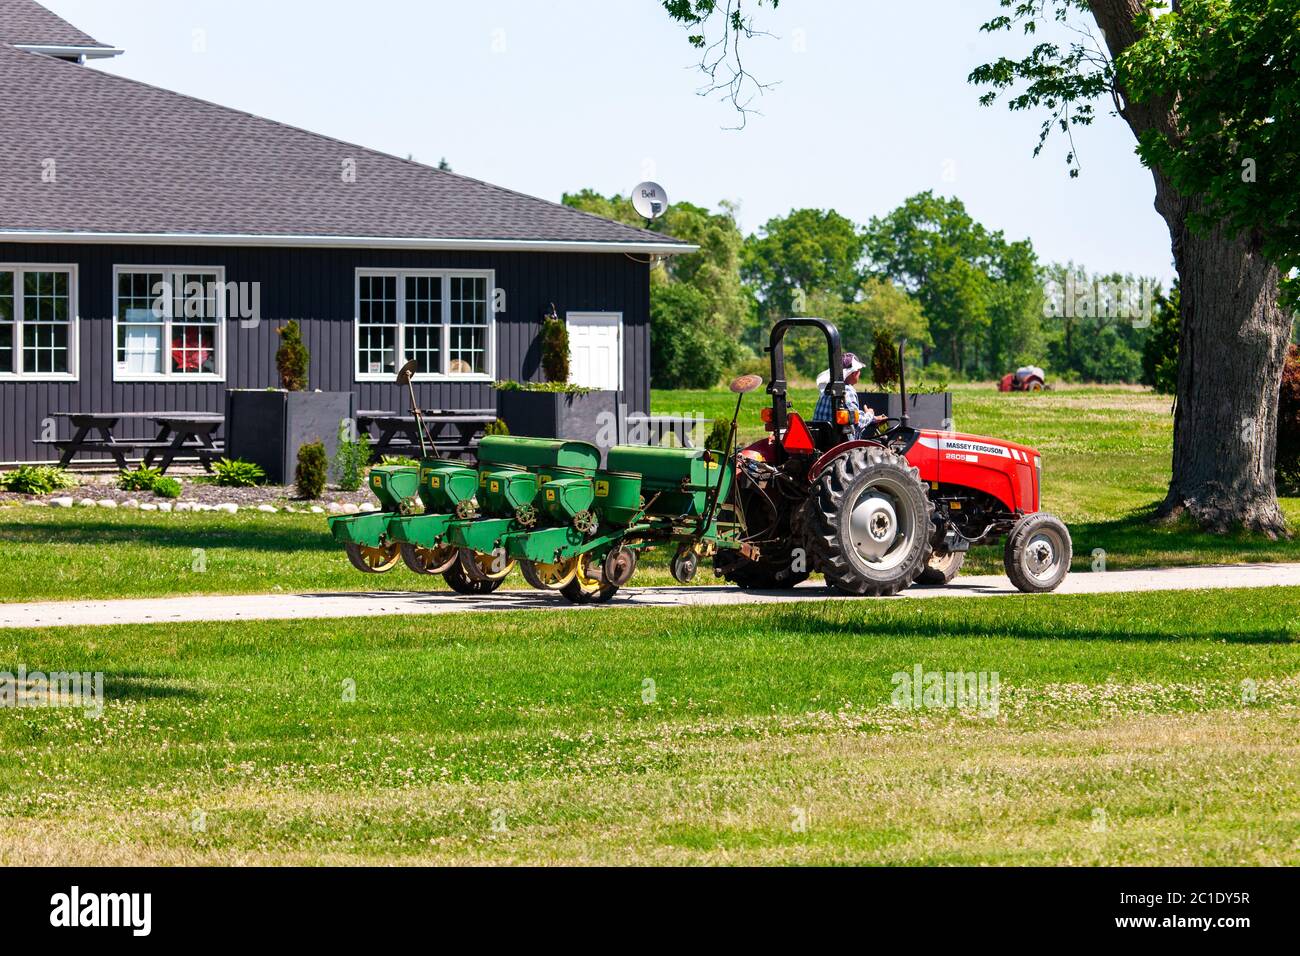 Talbotville, Canada - June 15, 2020. June in Southwestern Ontario means the start of Strawberry season. A farmer drives his tractor back to the barn after planting seed. Mark Spowart/Alamy Live News Stock Photo